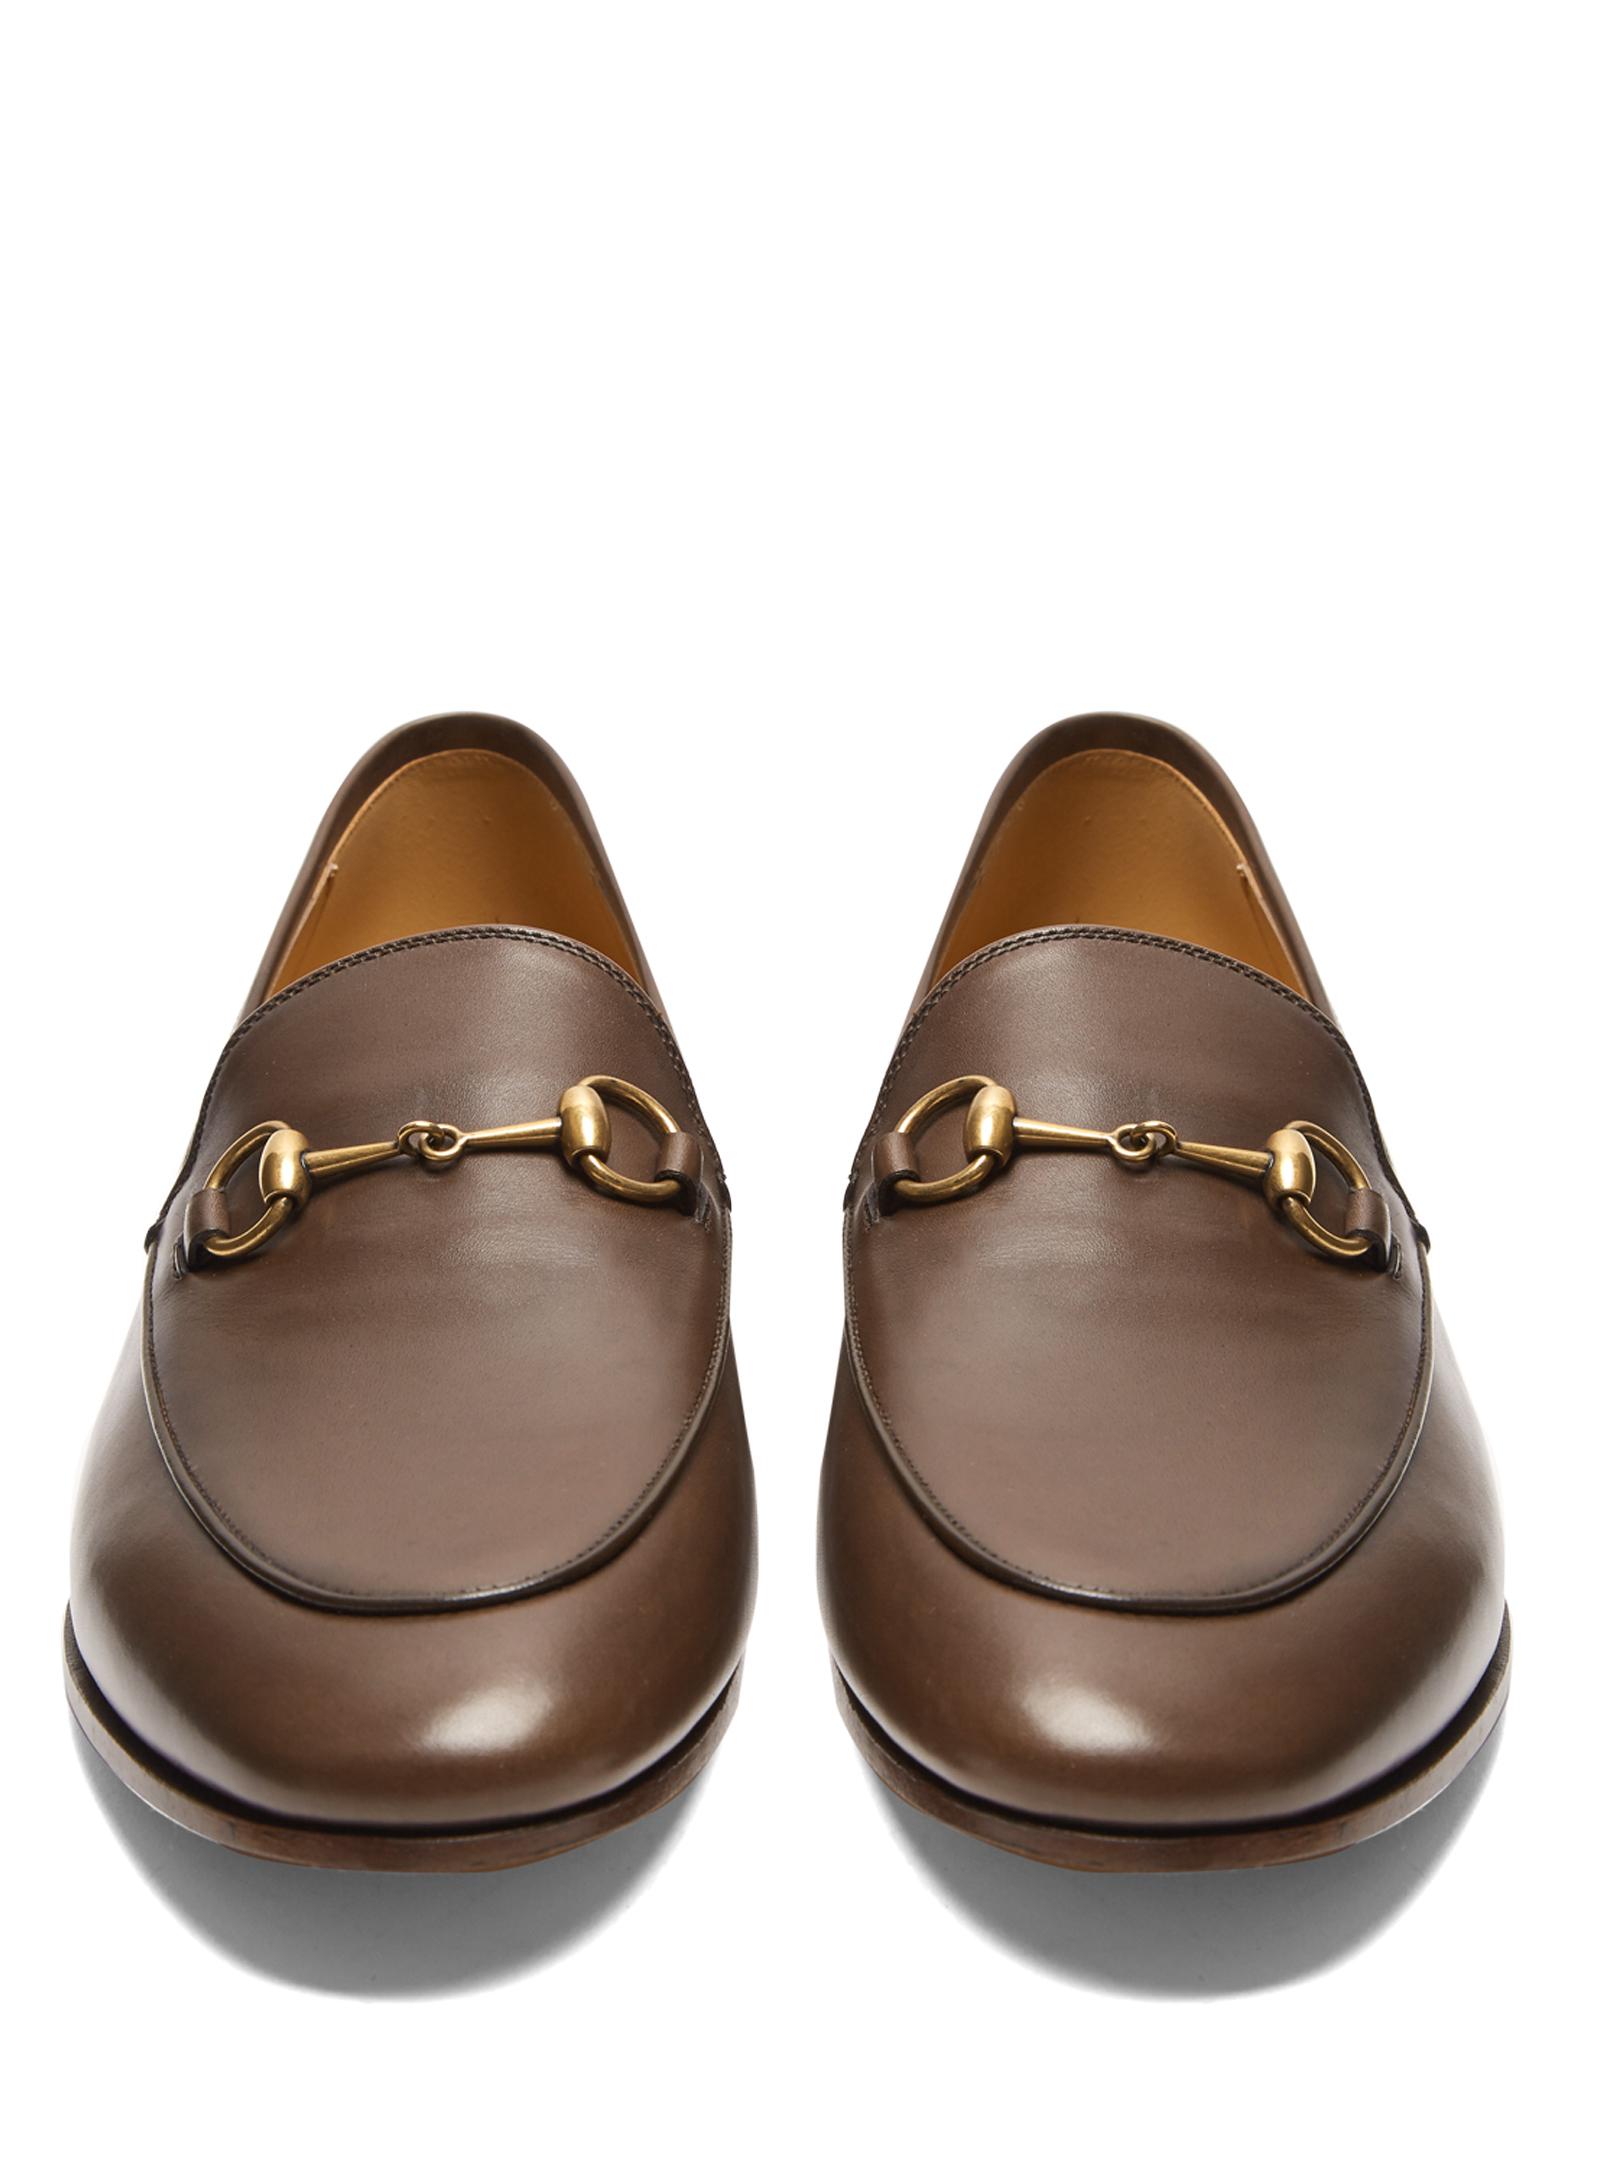 Gucci Leather Bit Loafer in Brown - Lyst